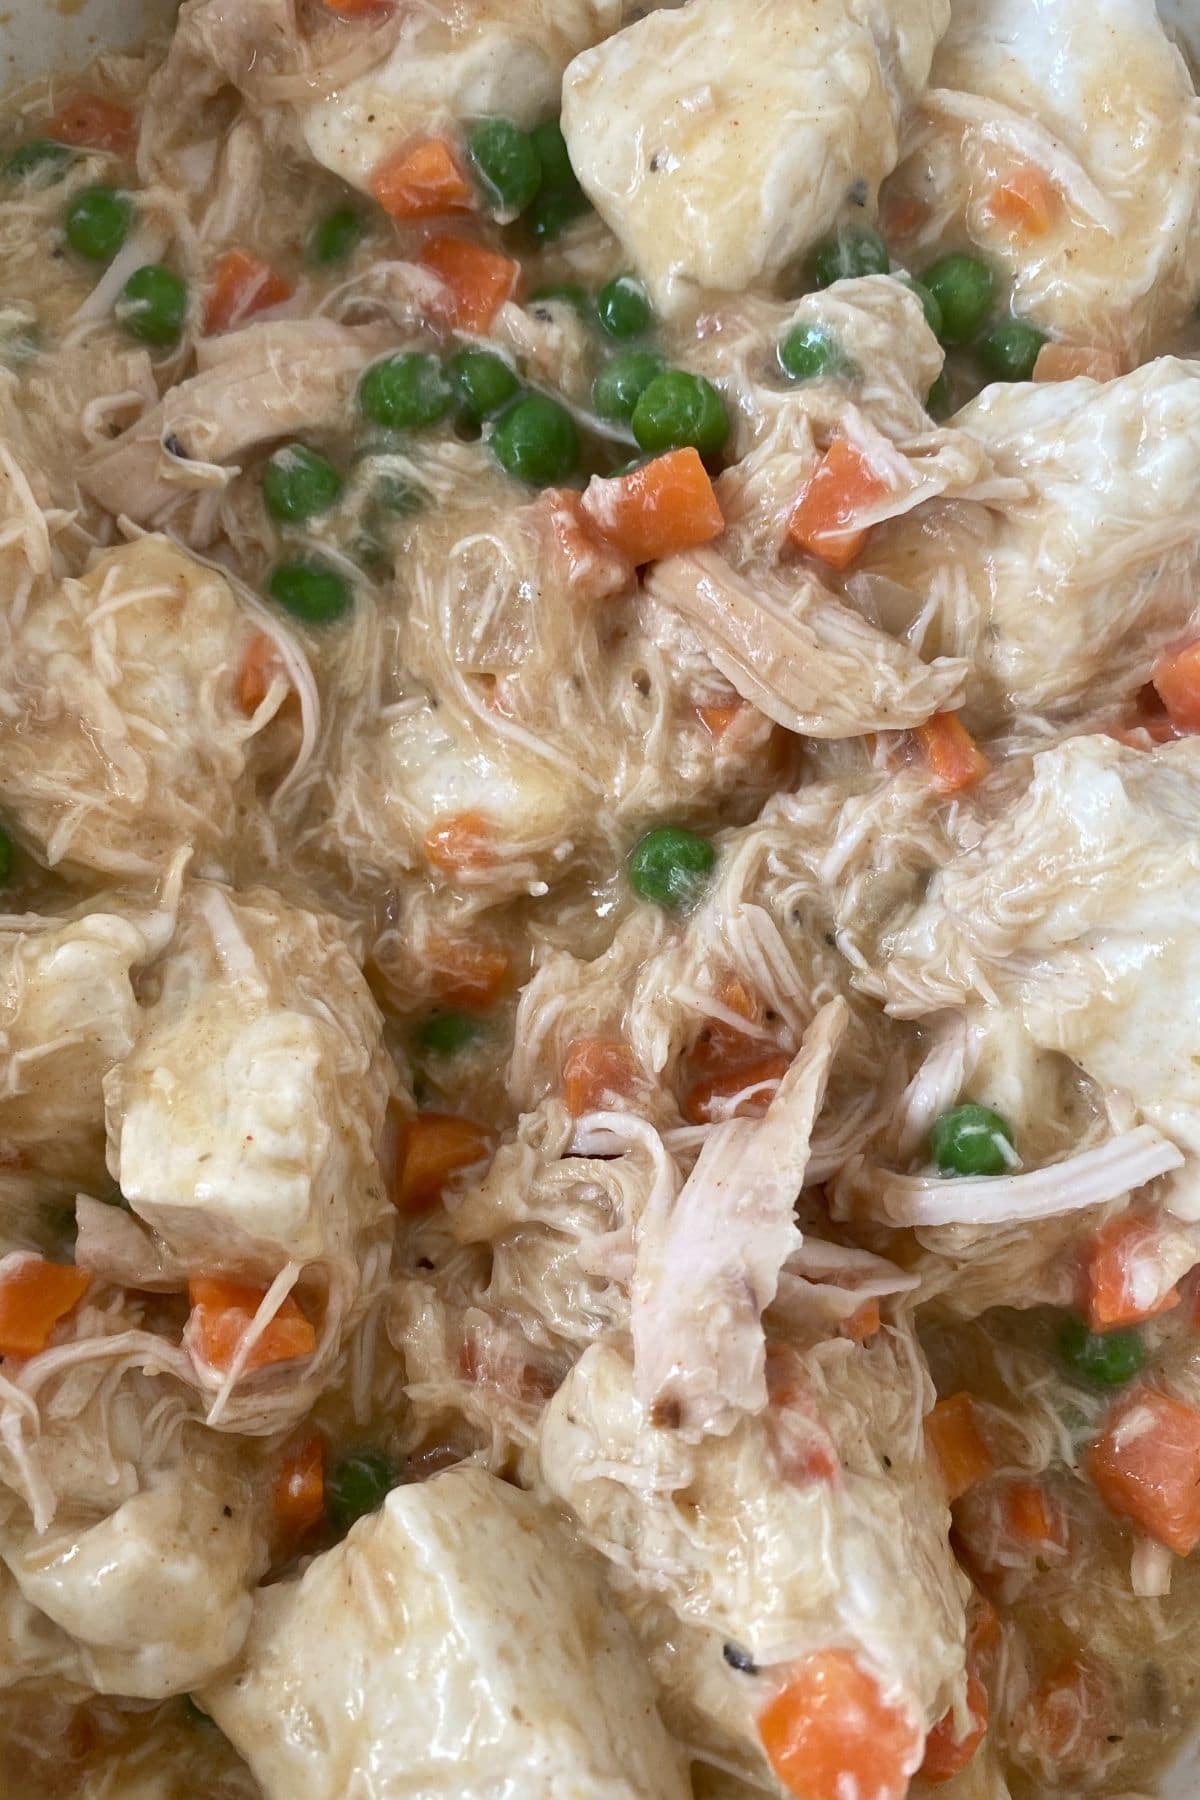 Shredded chicken with vegetables and biscuits